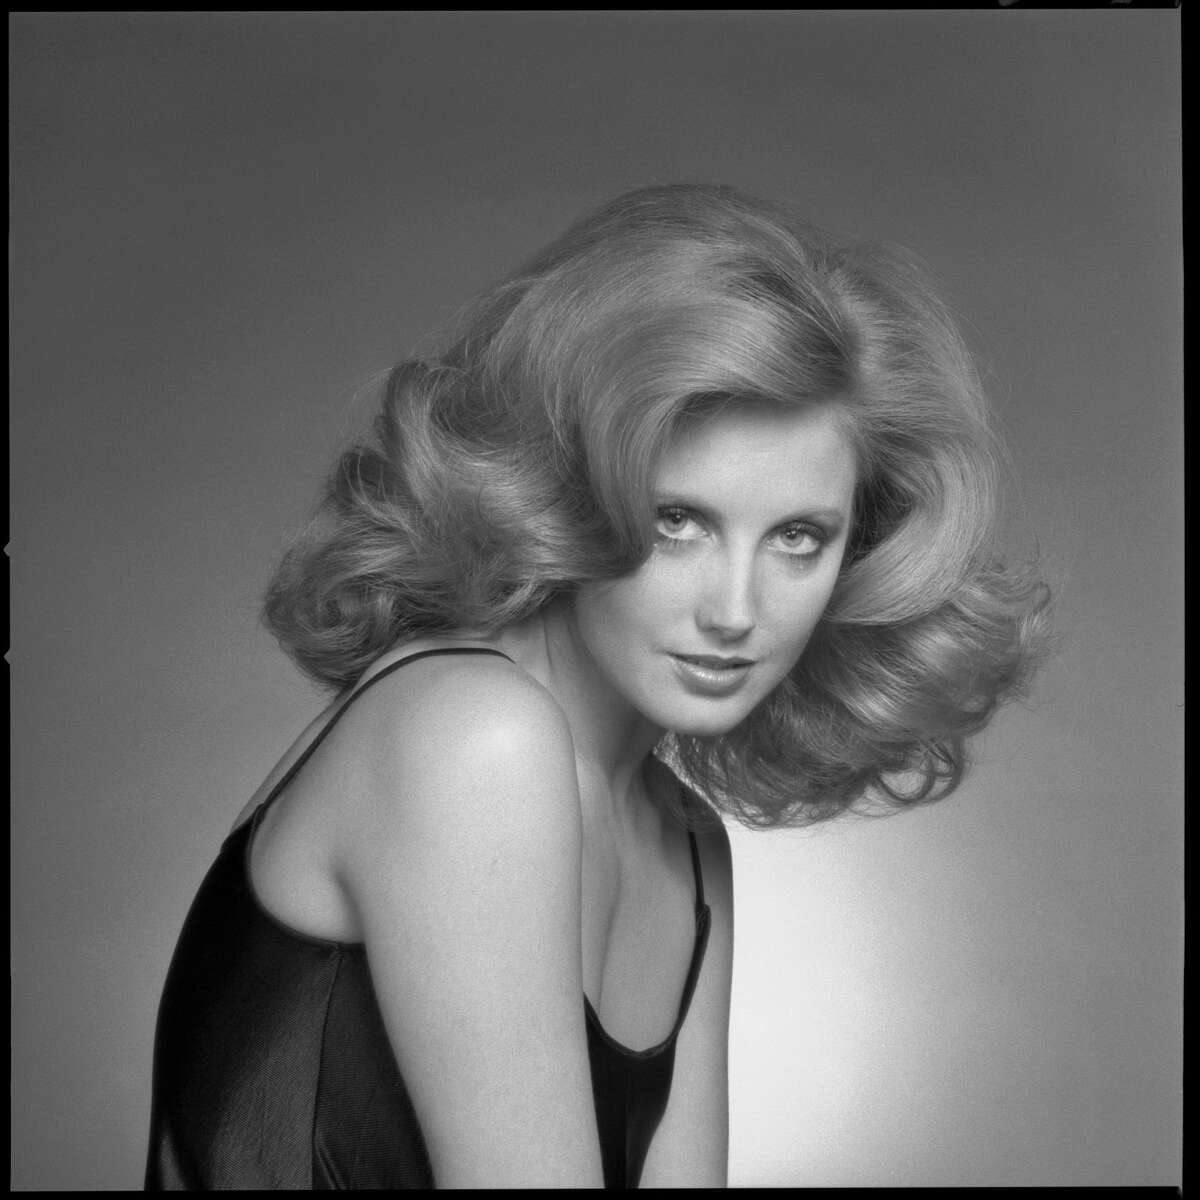 Morgan Fairchild in photo session for "Search for Tomorrow." Image Dated August 6, 1975.